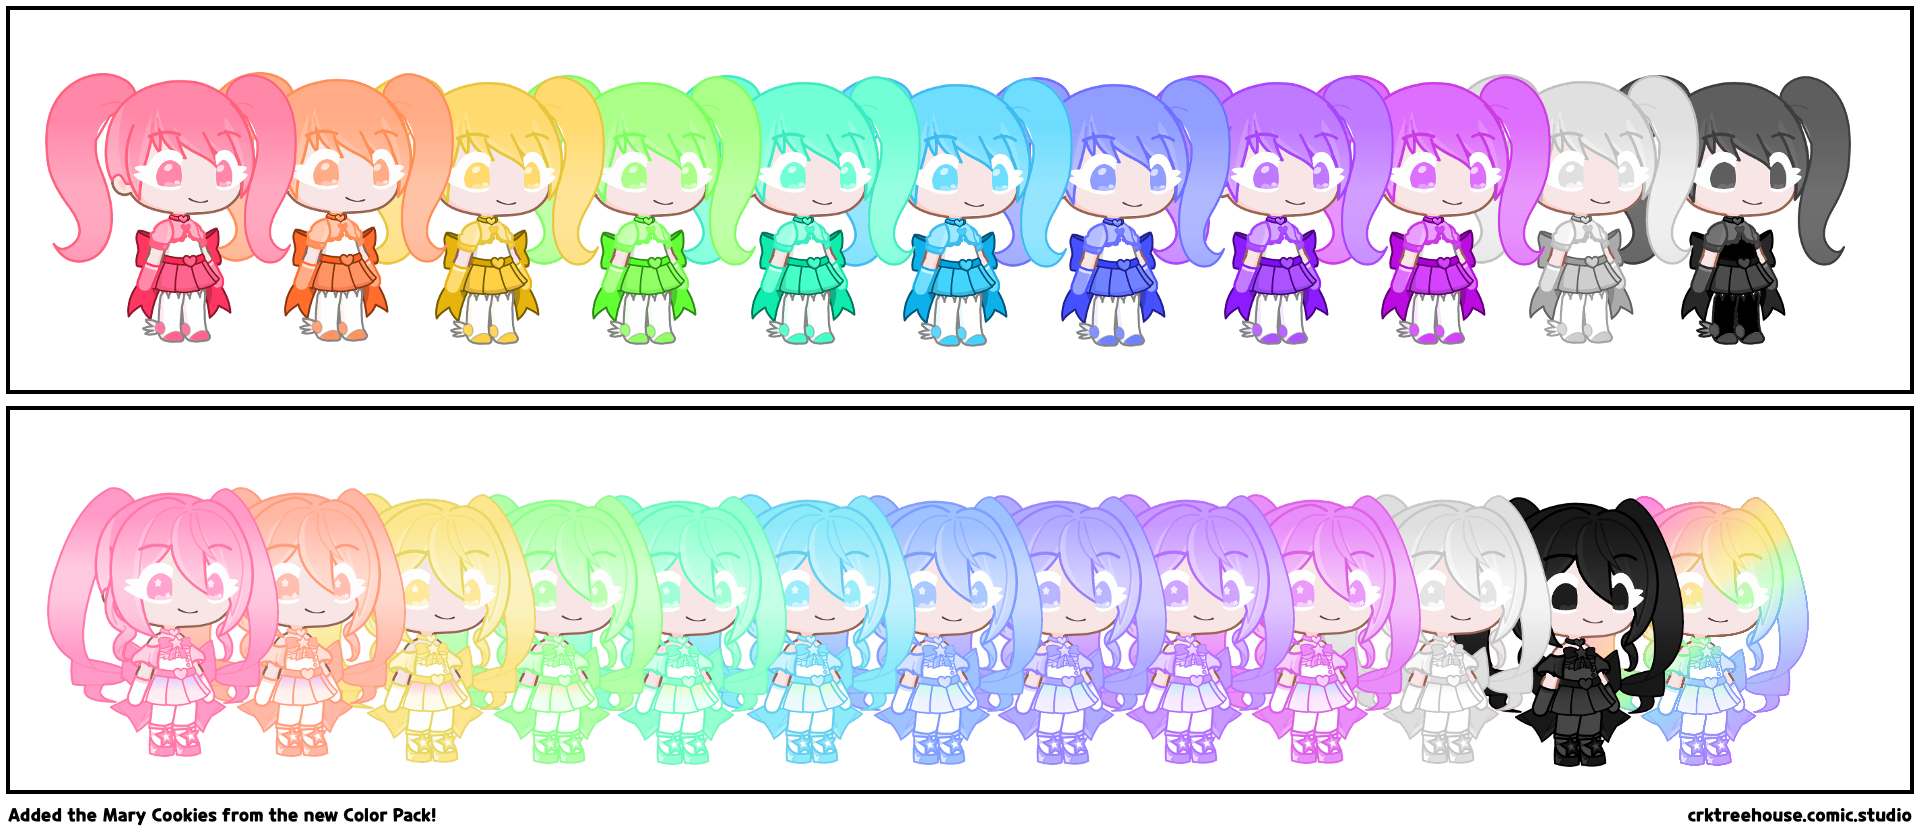 Added the Mary Cookies from the new Color Pack!